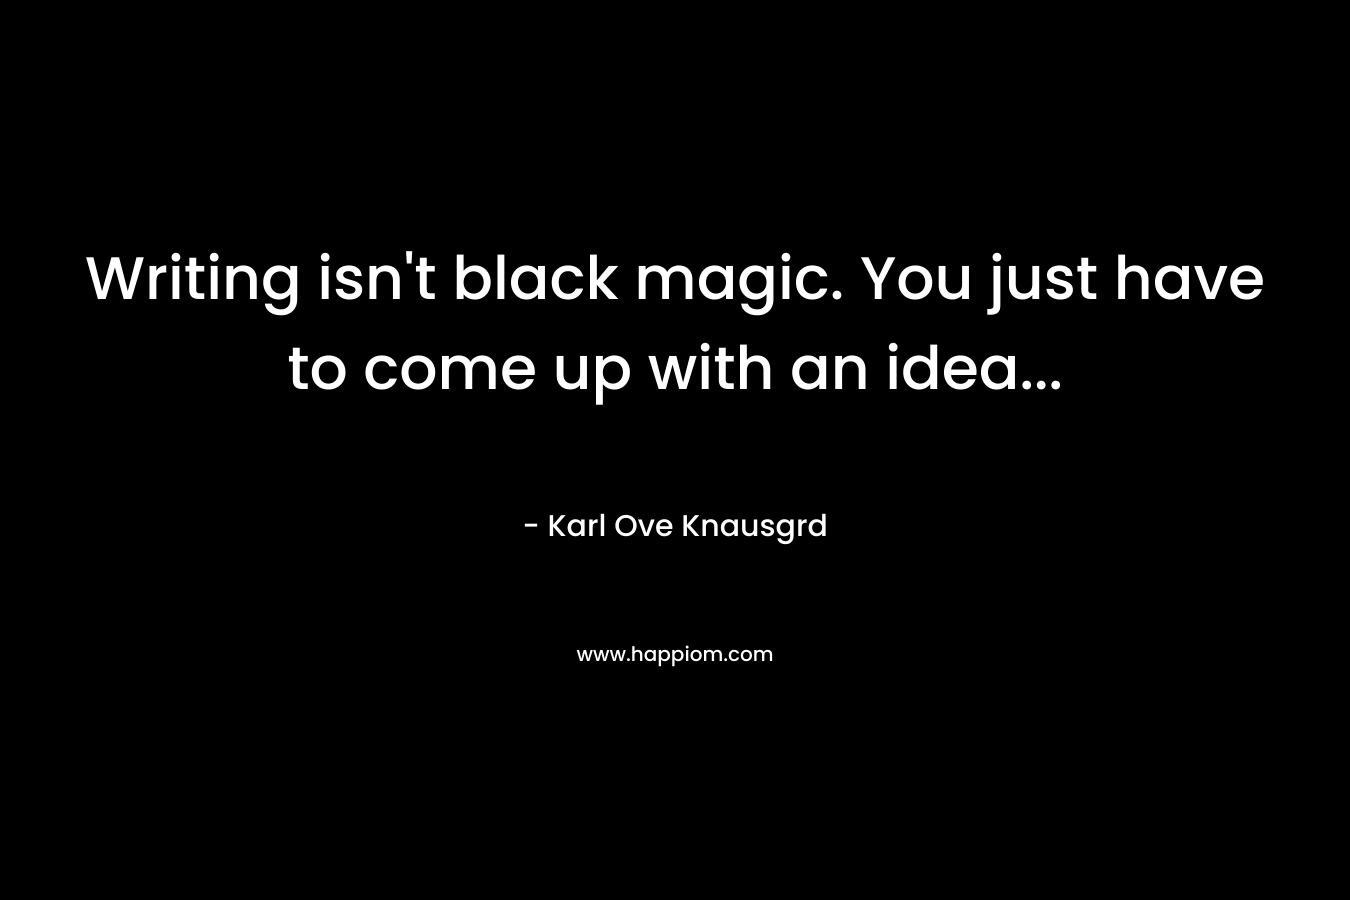 Writing isn't black magic. You just have to come up with an idea...